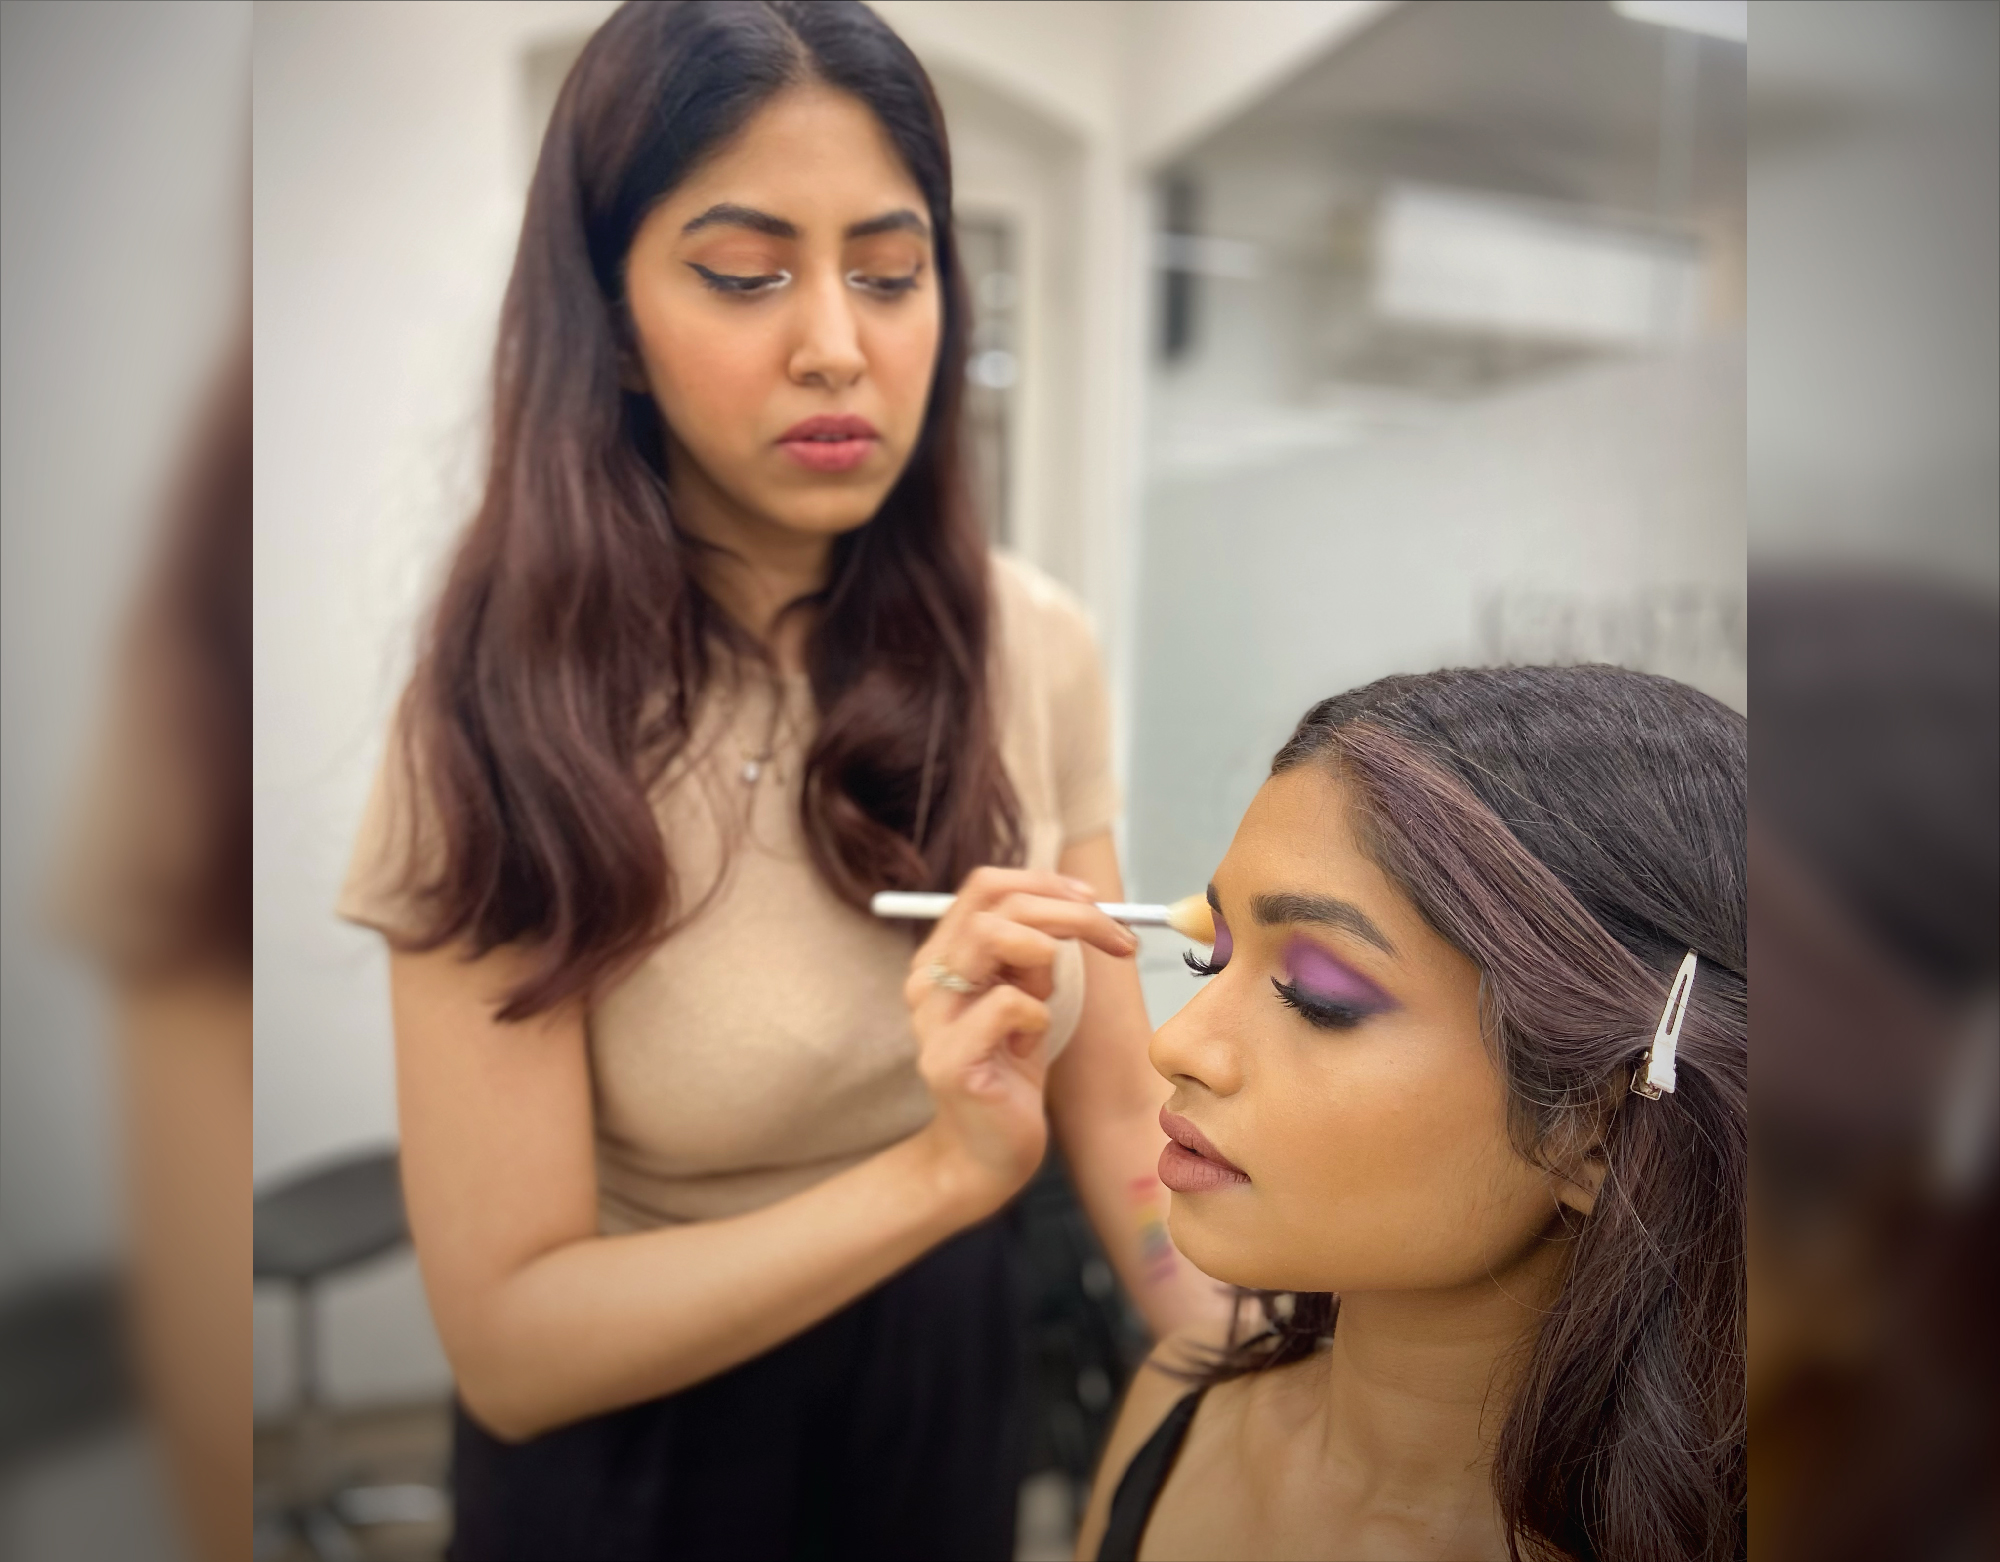 5 Careers to Choose From After Learning Makeup